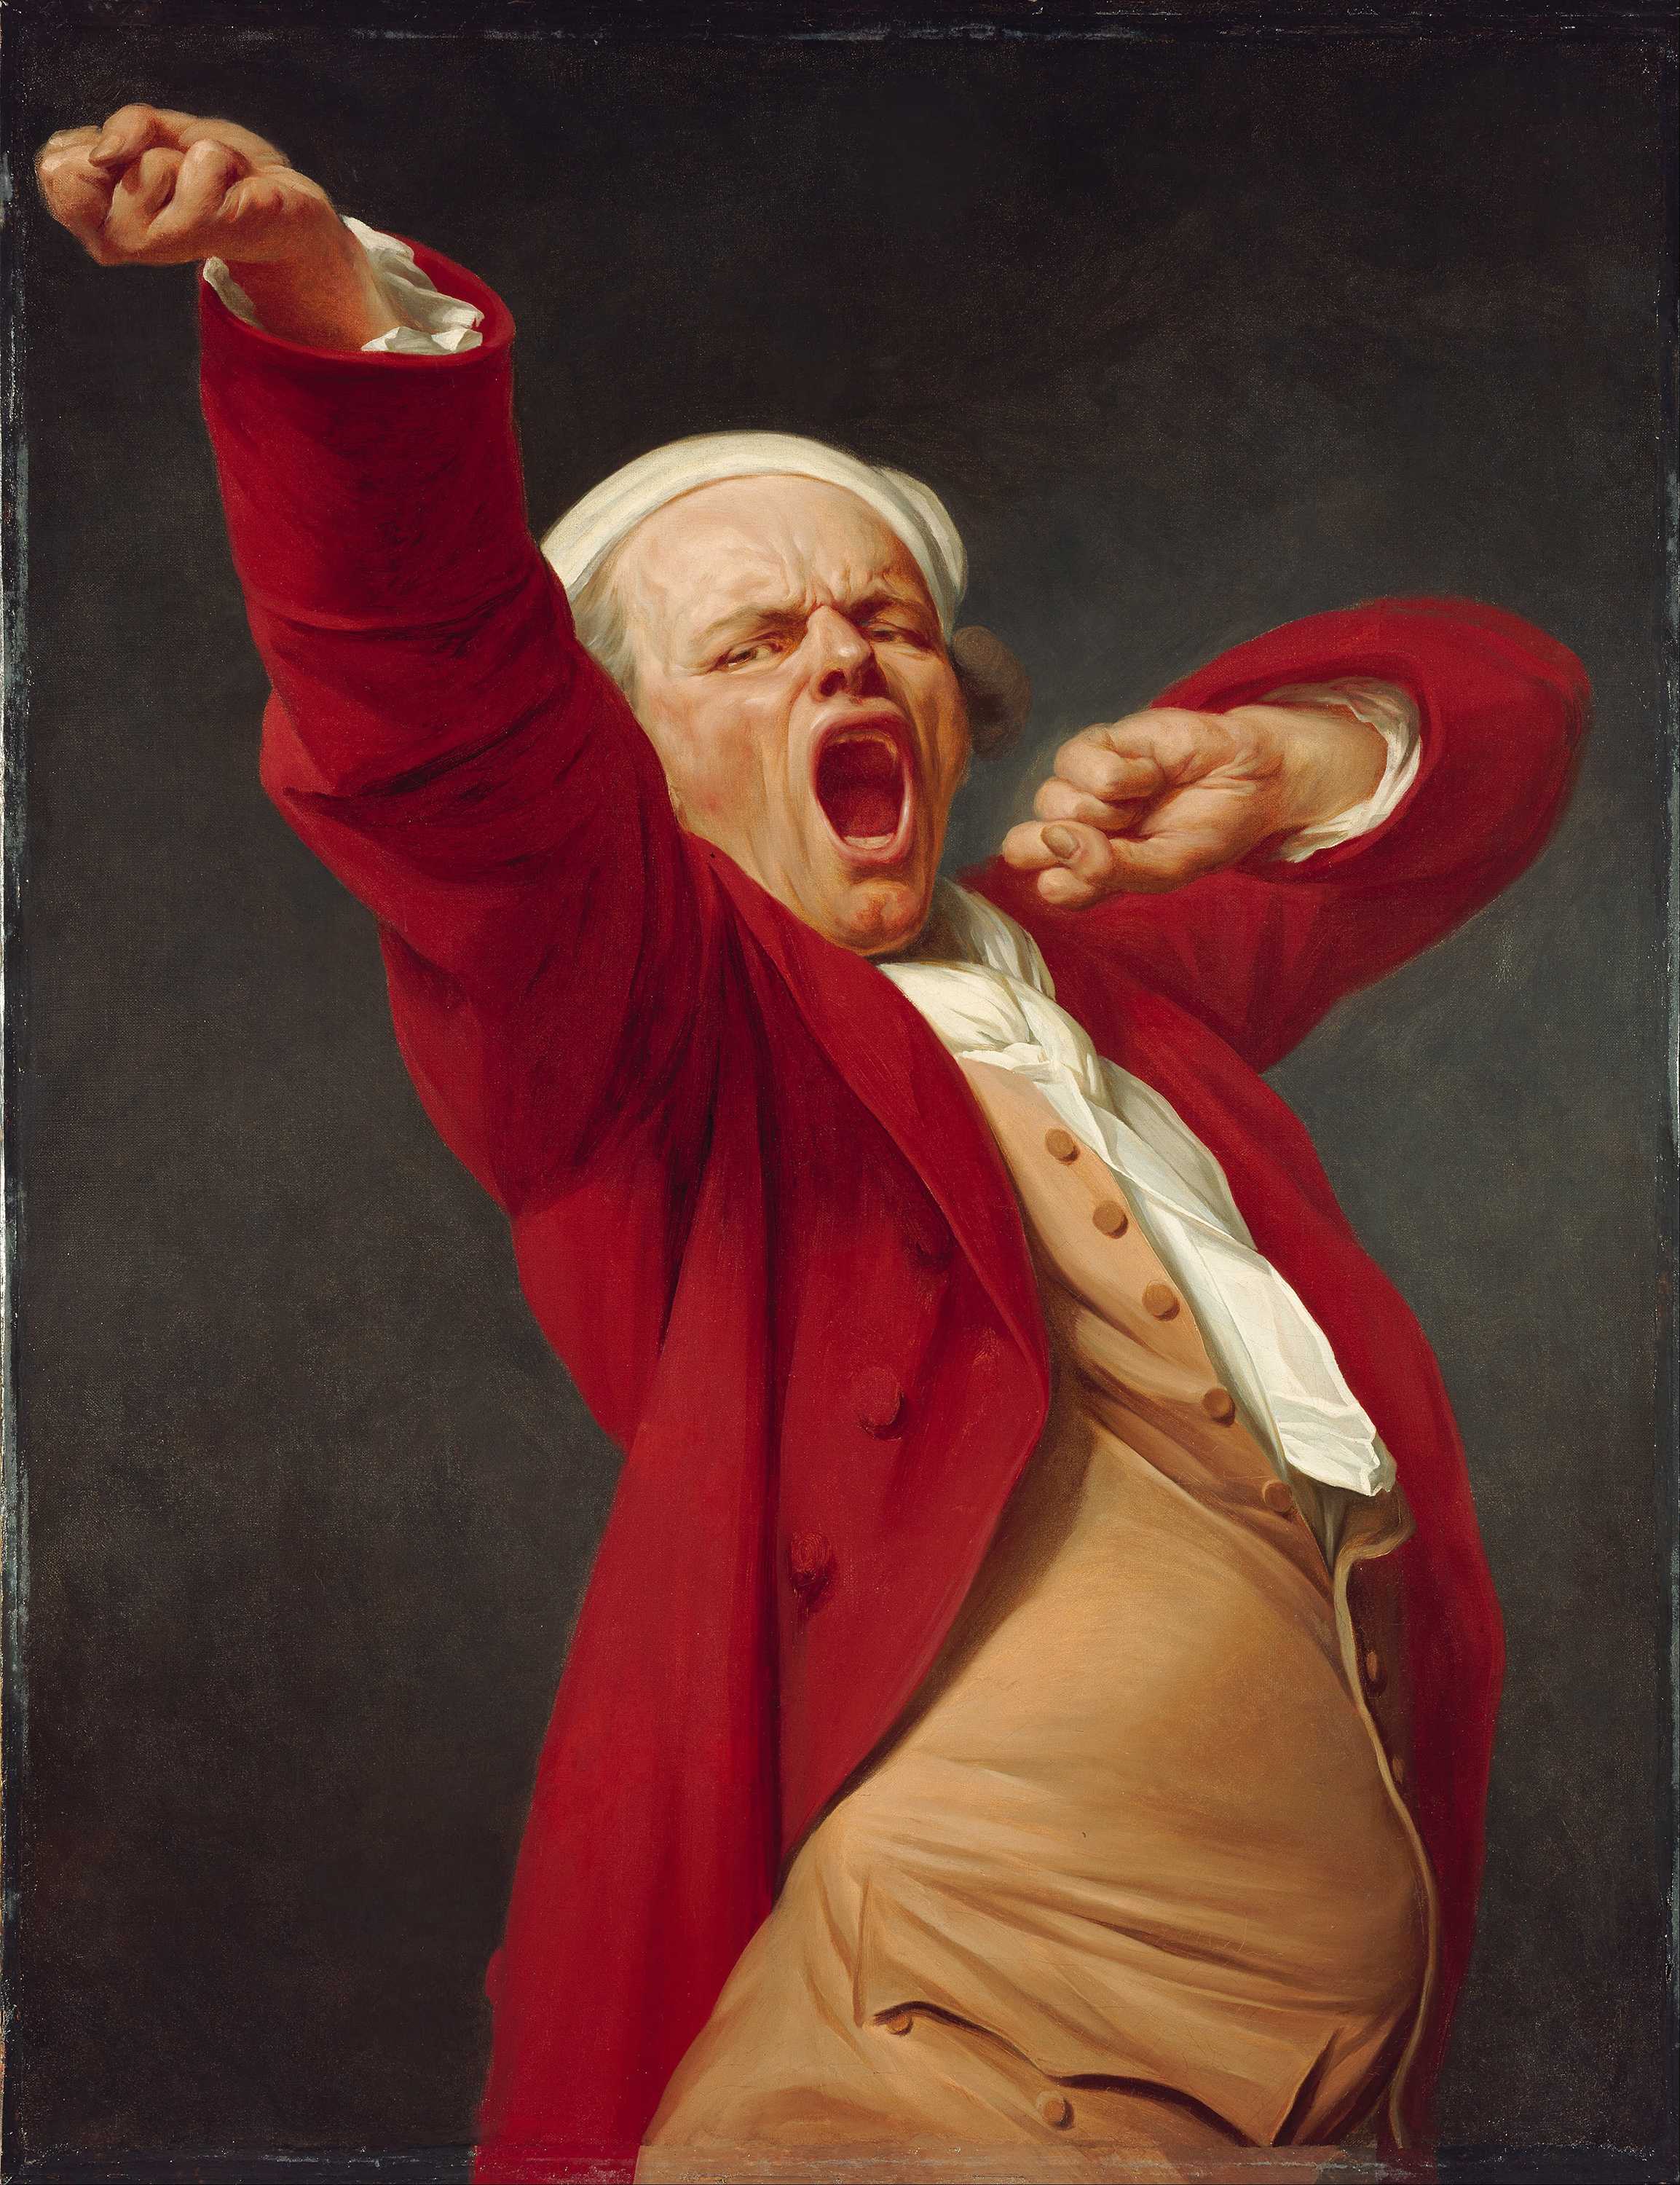 Find out more about Joseph Ducreux - Self-Portrait, Yawning